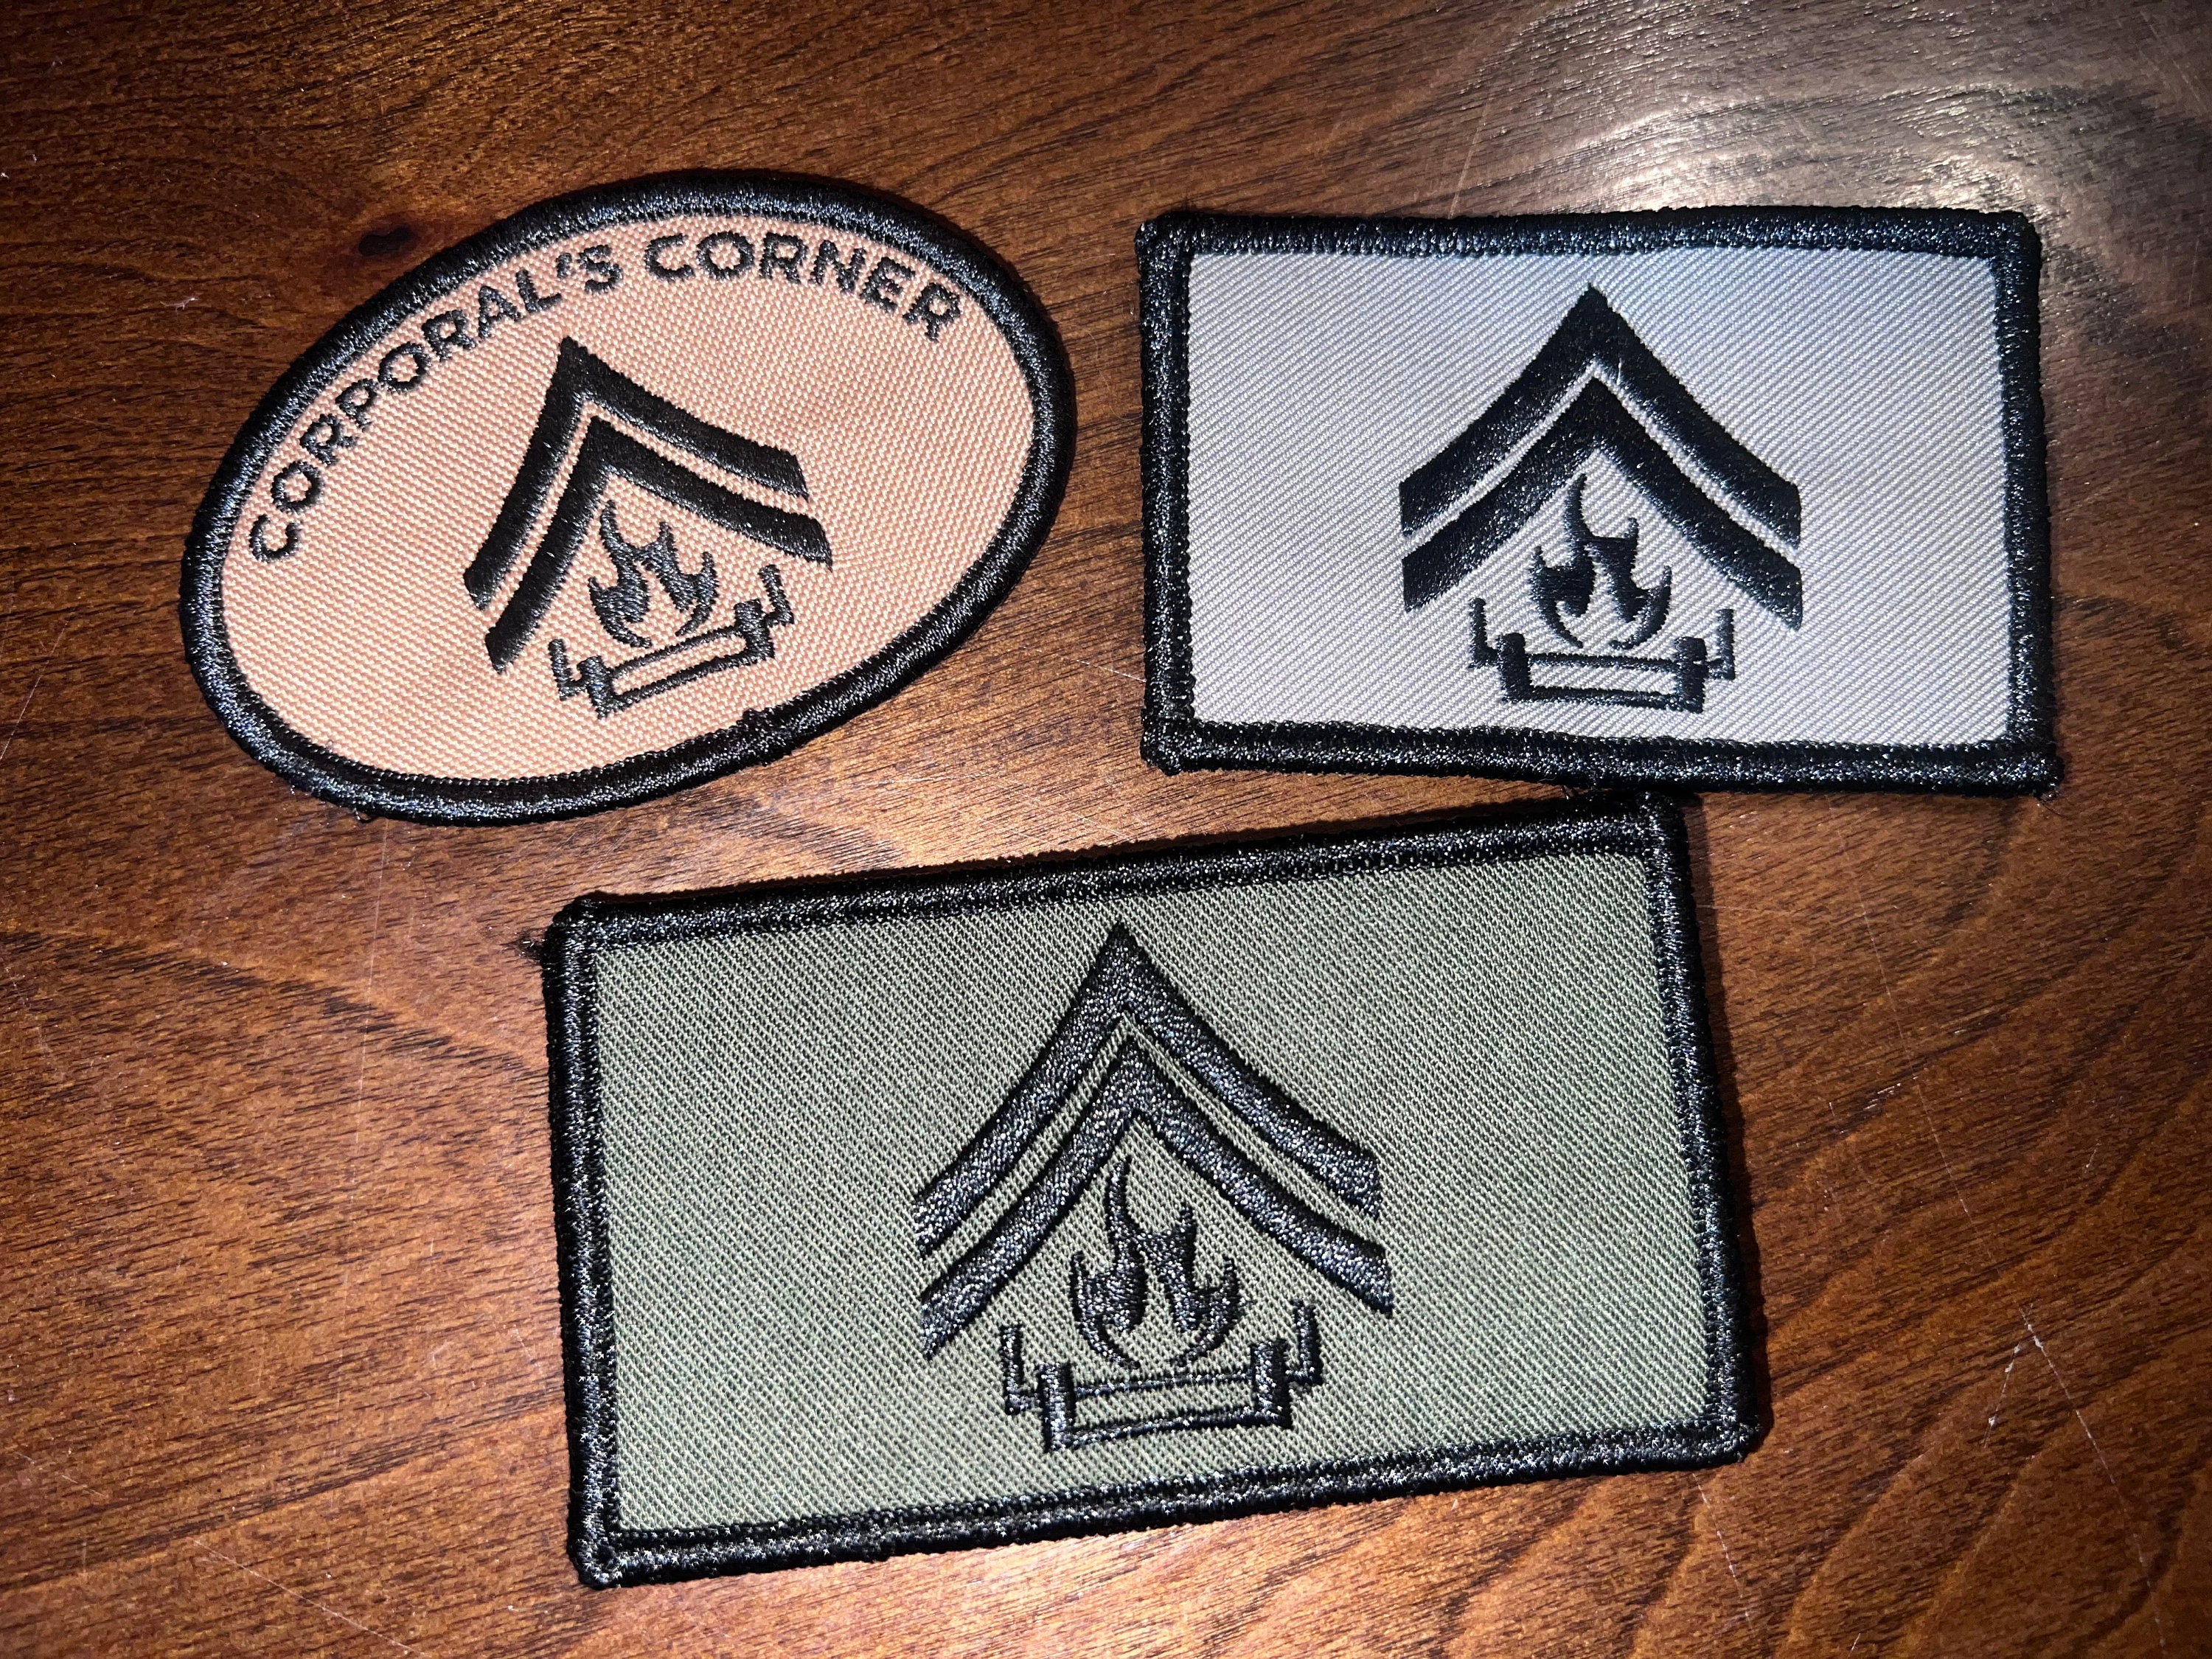 Corporals Corner 3 Patch Combo Pack combine Shipping and Save